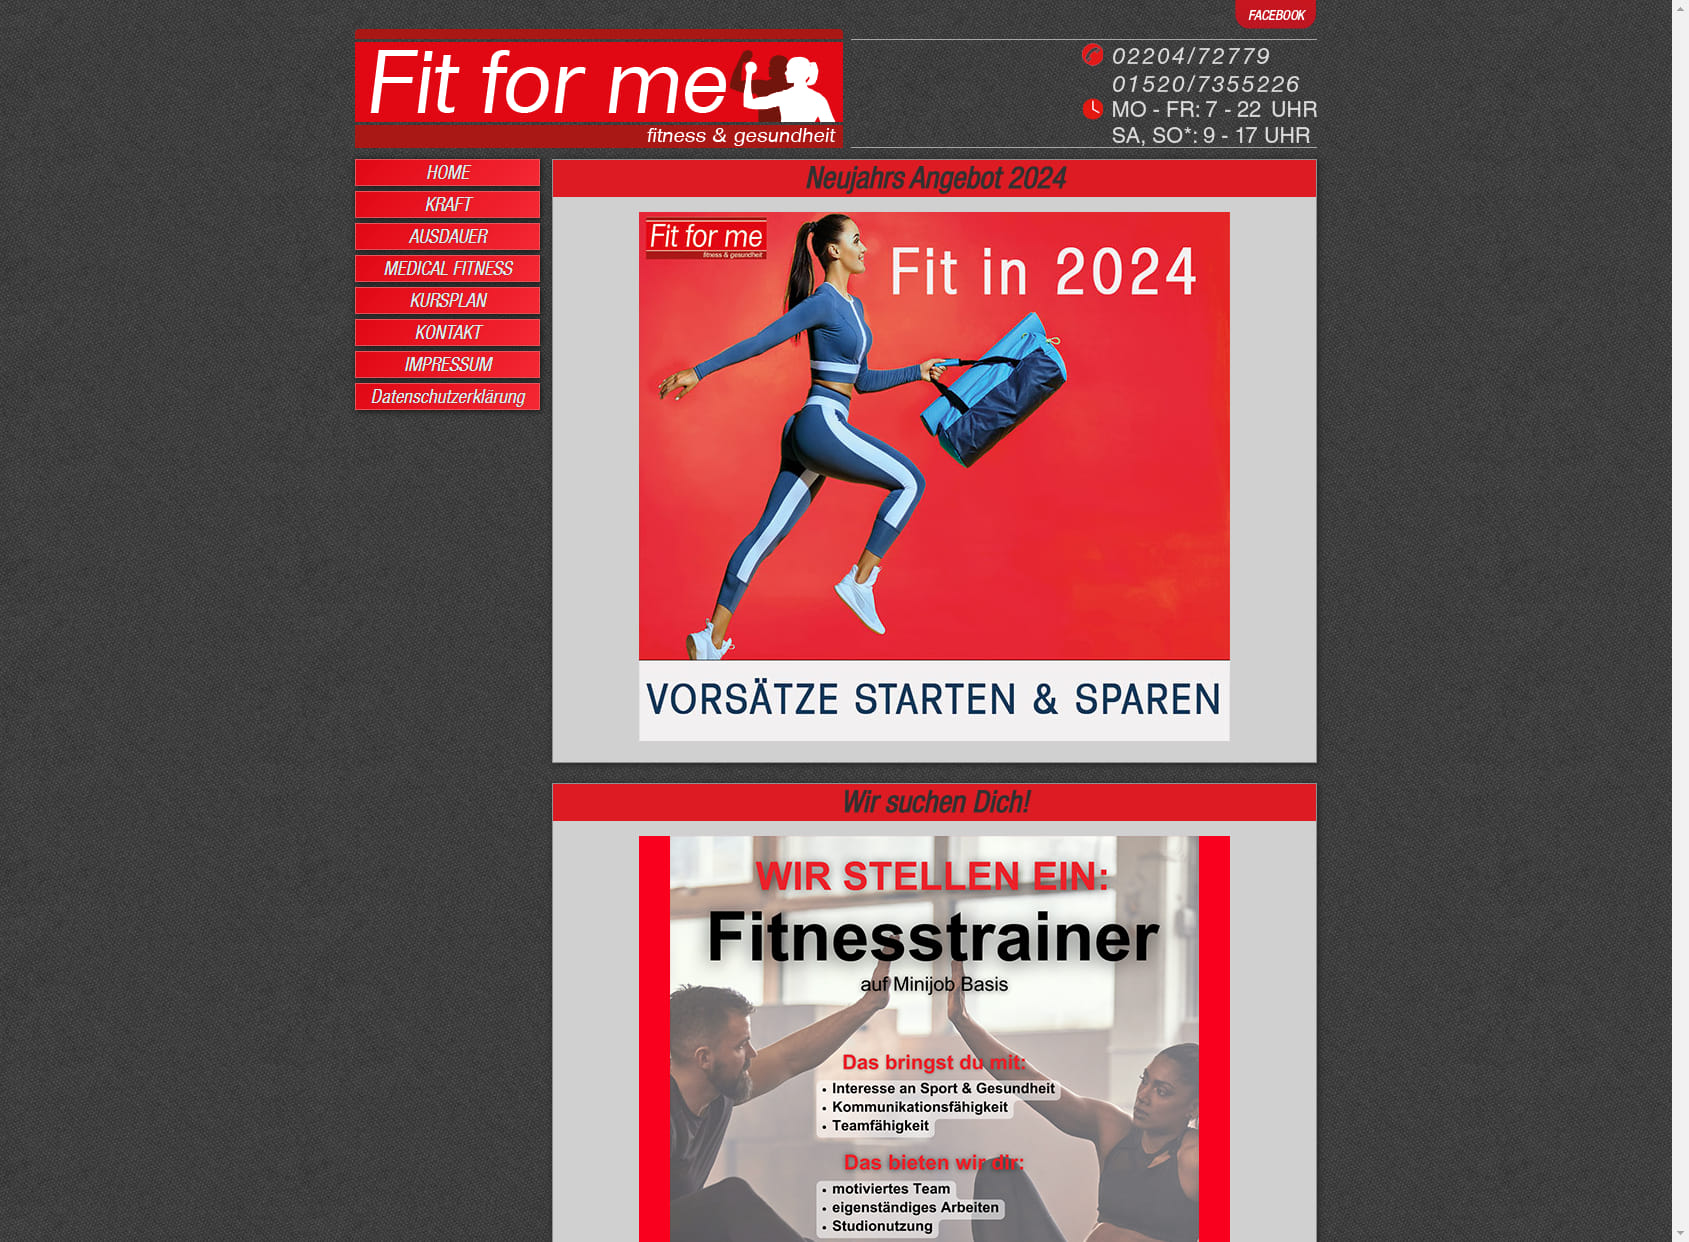 Fit for me - Fitness & Gesundheit GmbH